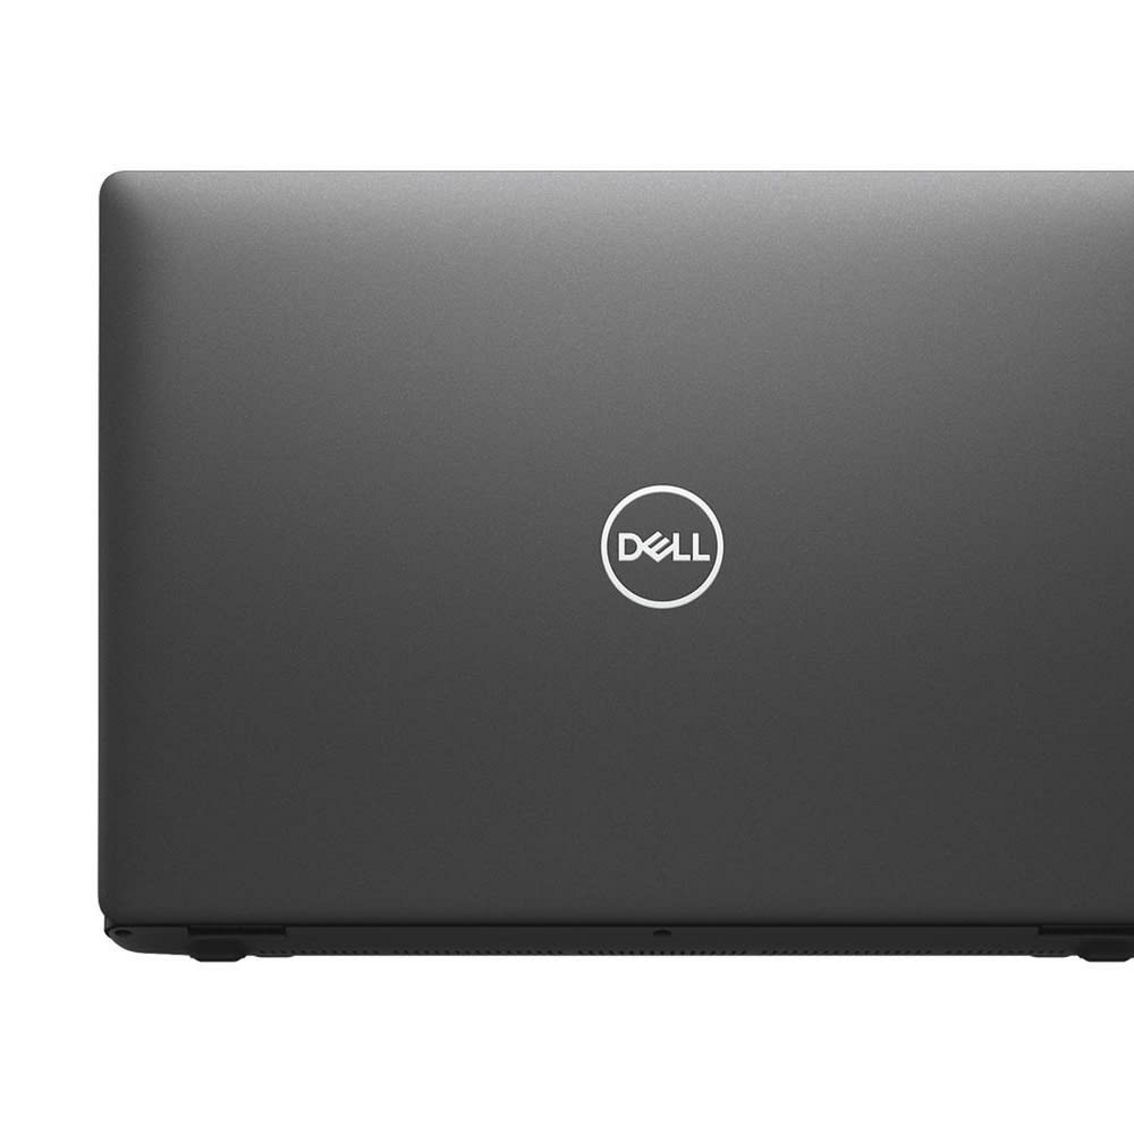 Dell 5401 Core i7-9850H 2.6GHz 16GB 512GB SSD Laptop (Refurbished) - Image 2 of 4